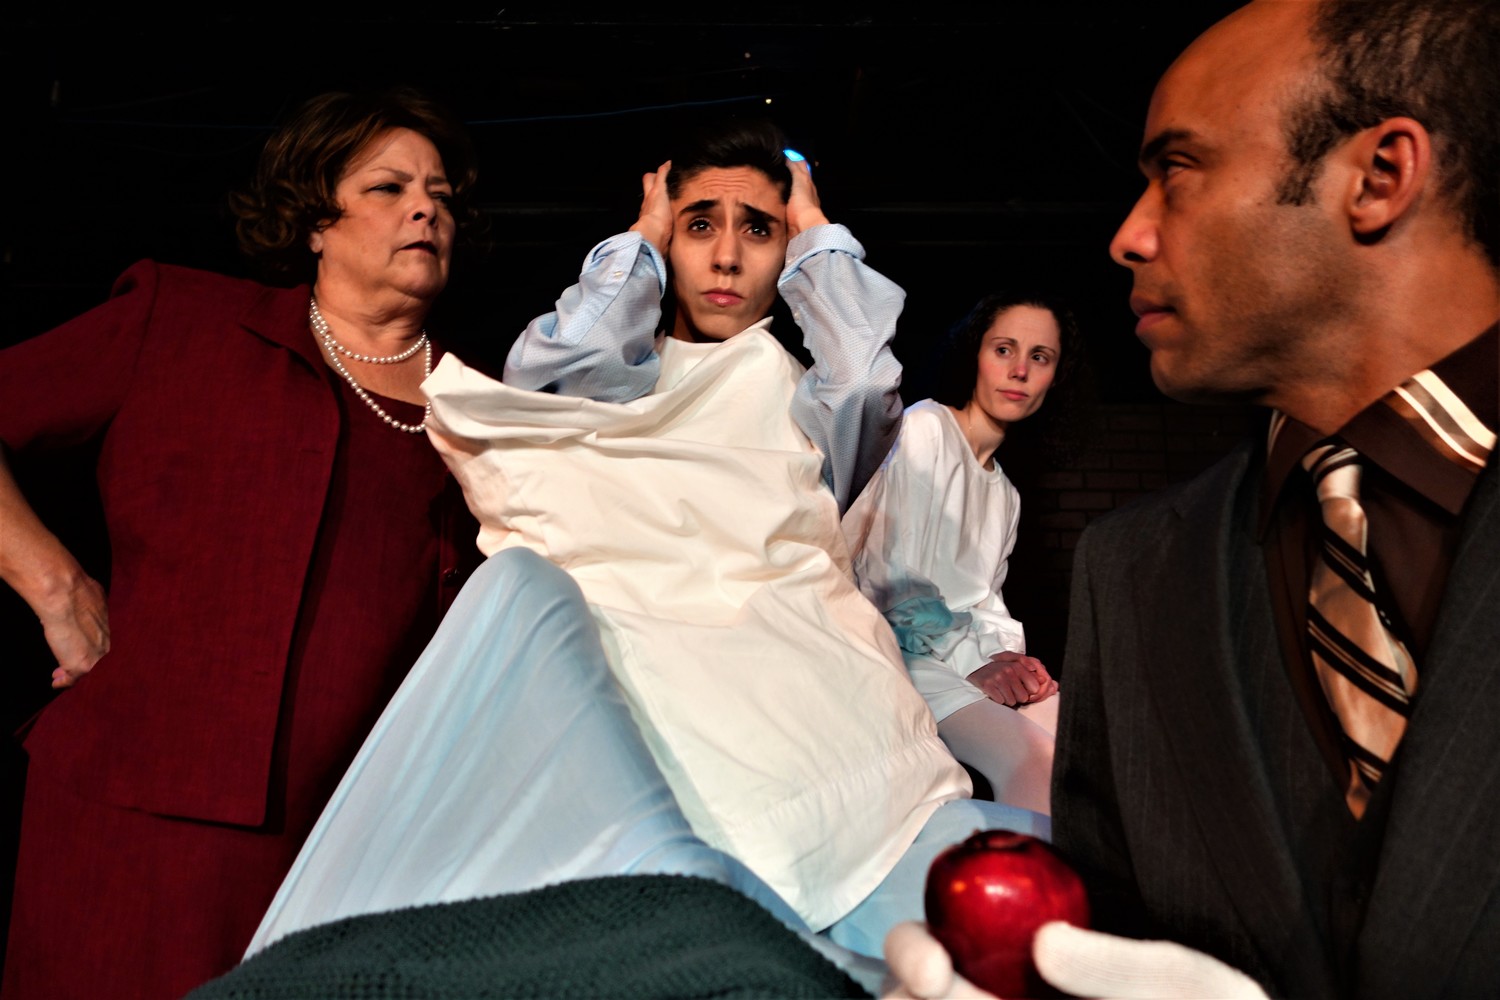 Theatre Three 20th ANNUAL FESTIVAL OF ONE-ACT PLAYS Counting Sheep by Jae Kramisen clockwise Antoine Jones, Kate Keating, Joan St. Onge, Jacqueline M. Hughes. Photo credit Peter Lanscombe. 1